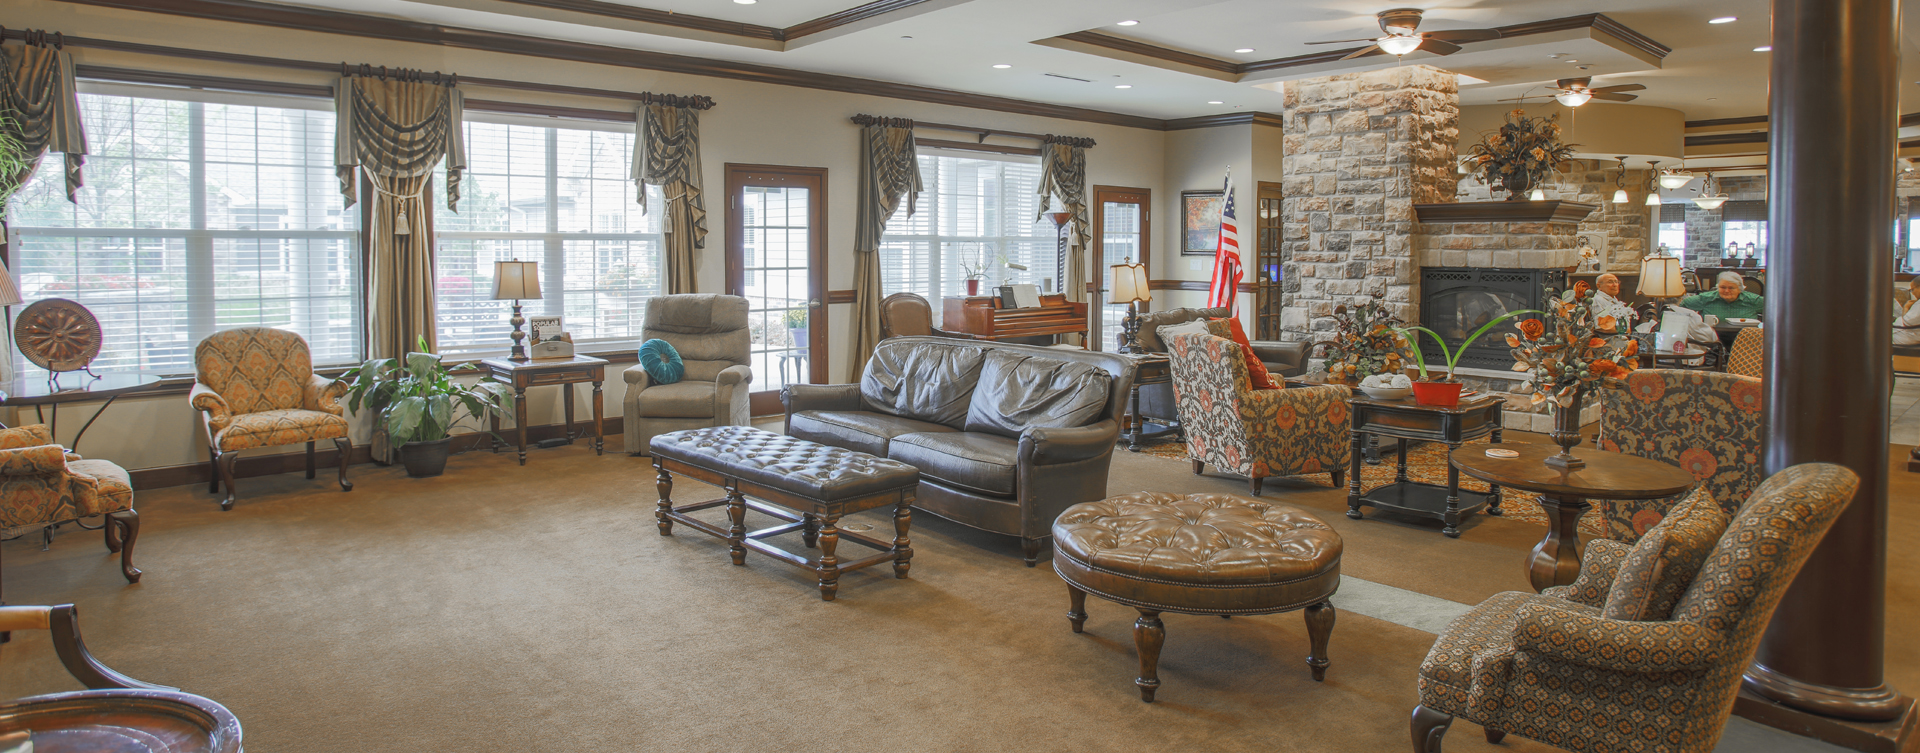 Enjoy a good book in the living room at Bickford of Carmel